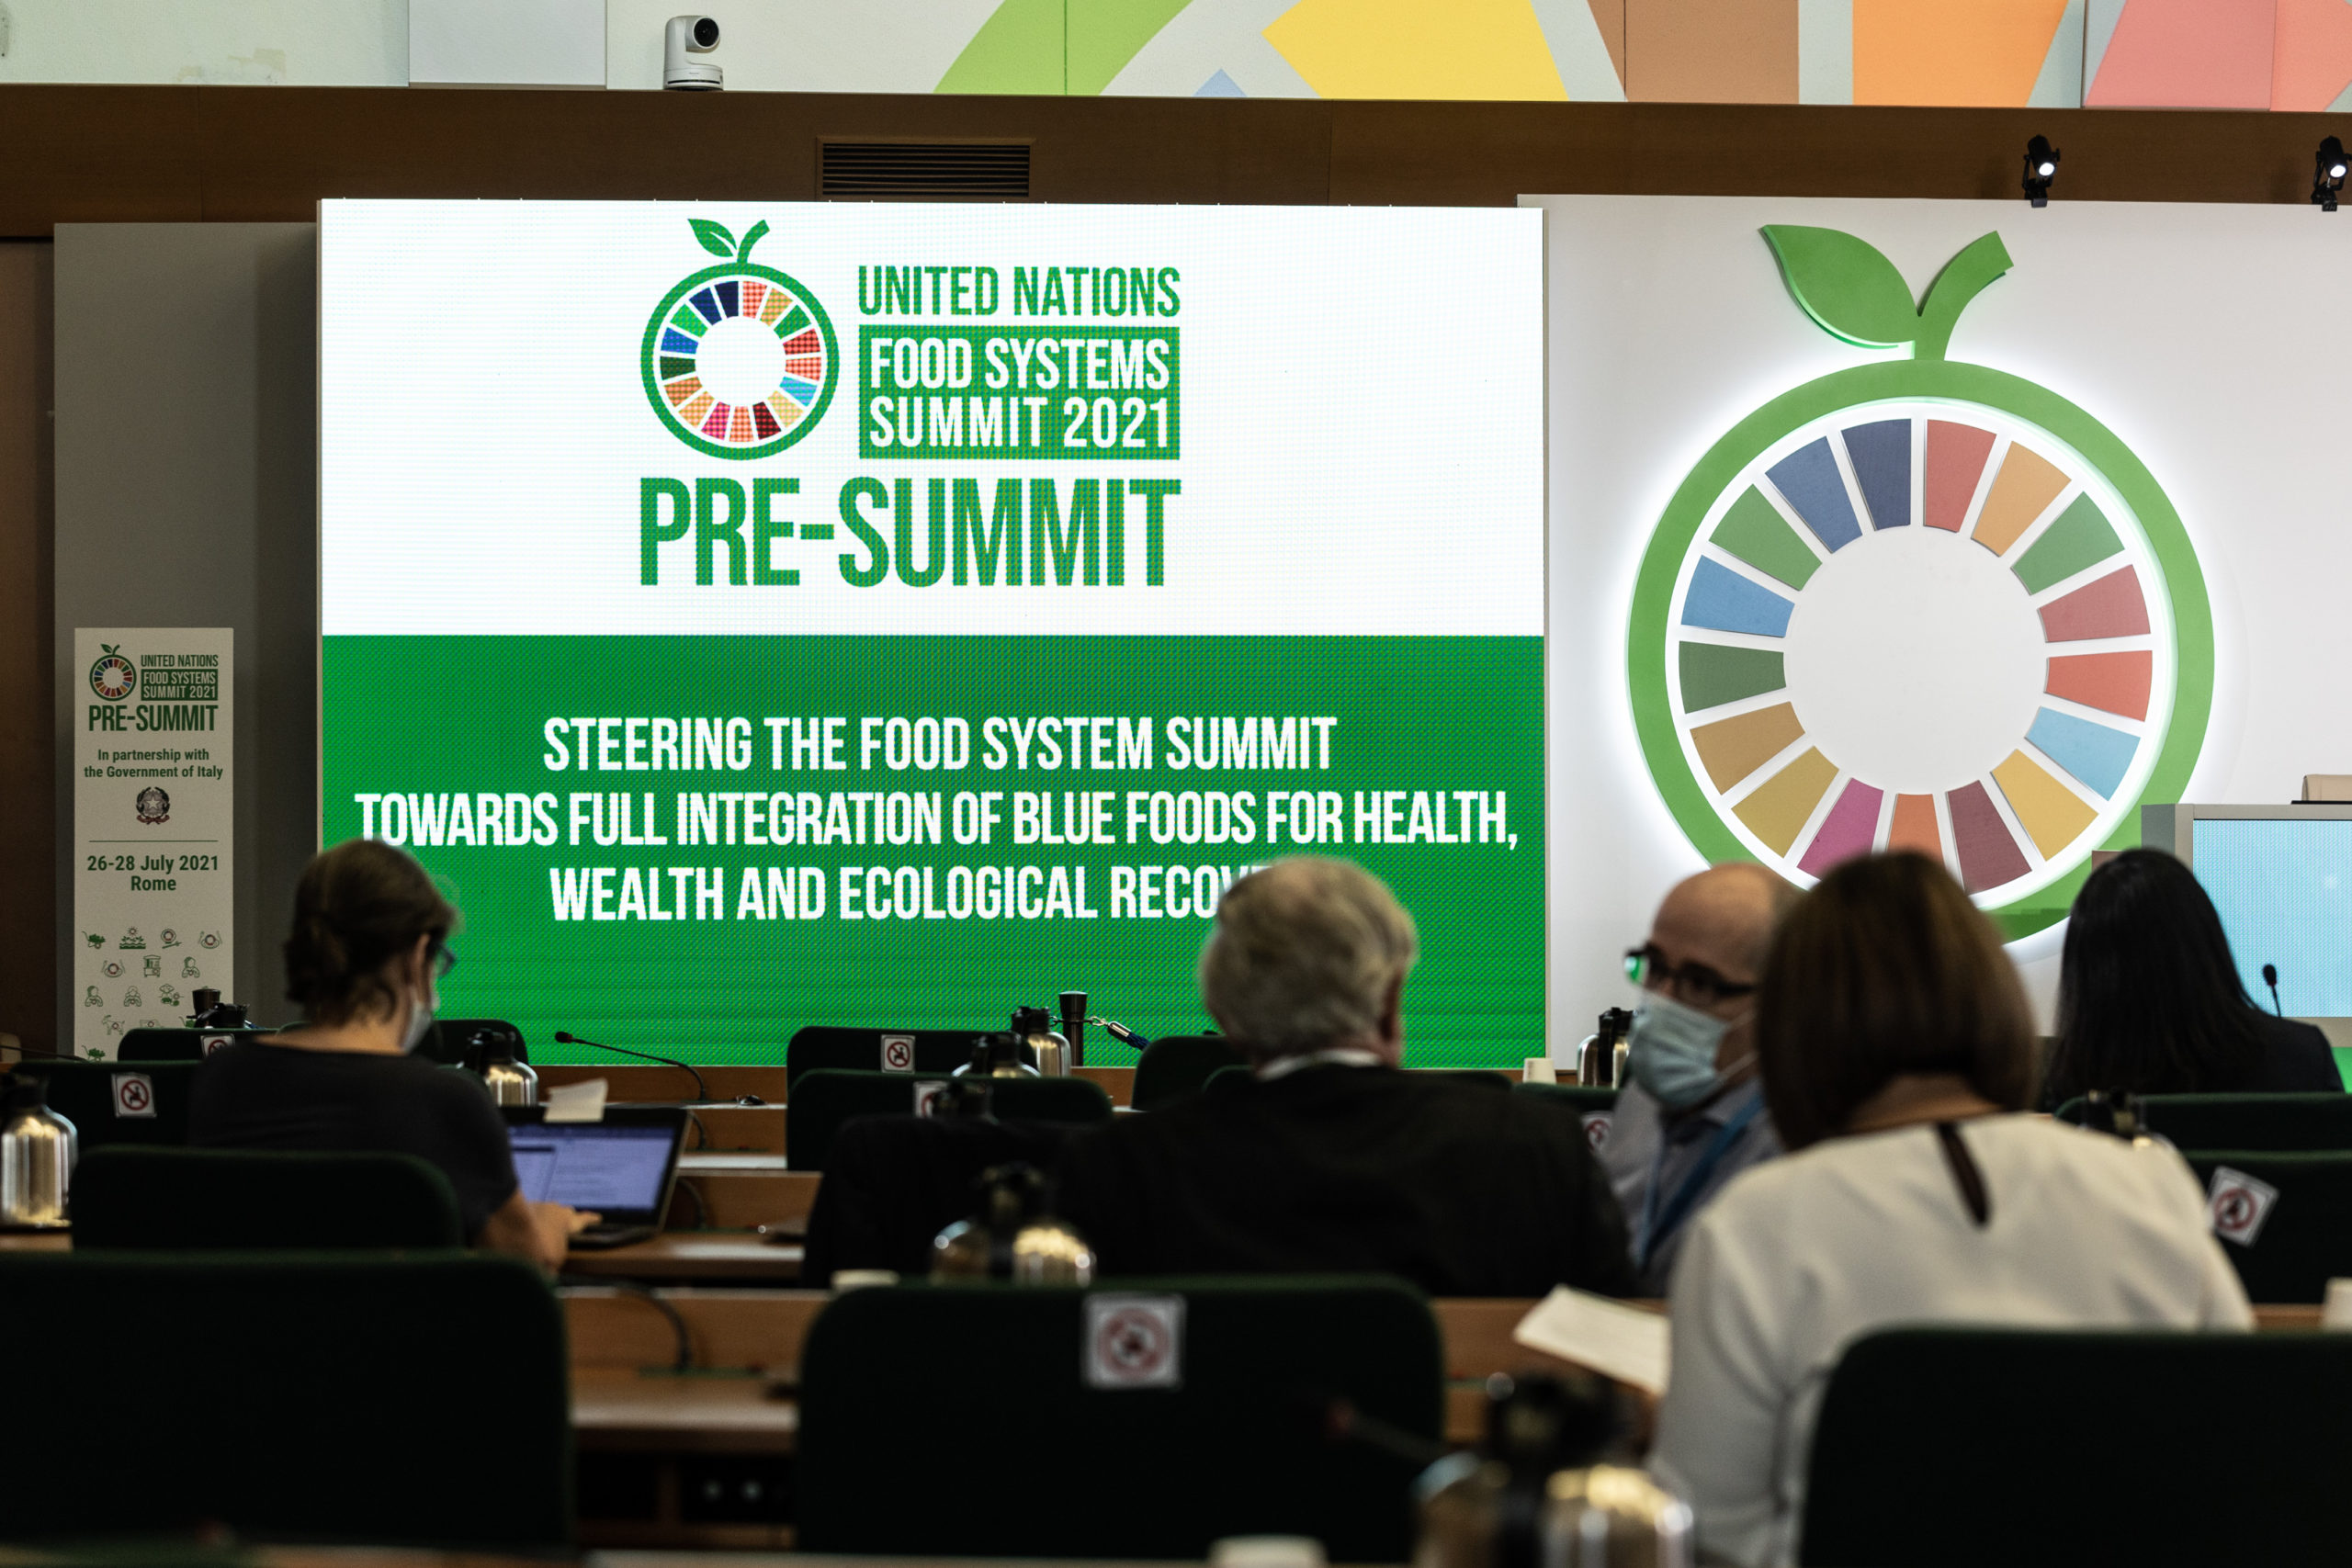 People wait in event venue for the Pre-Summit of the United Nations Food System Summit 2021